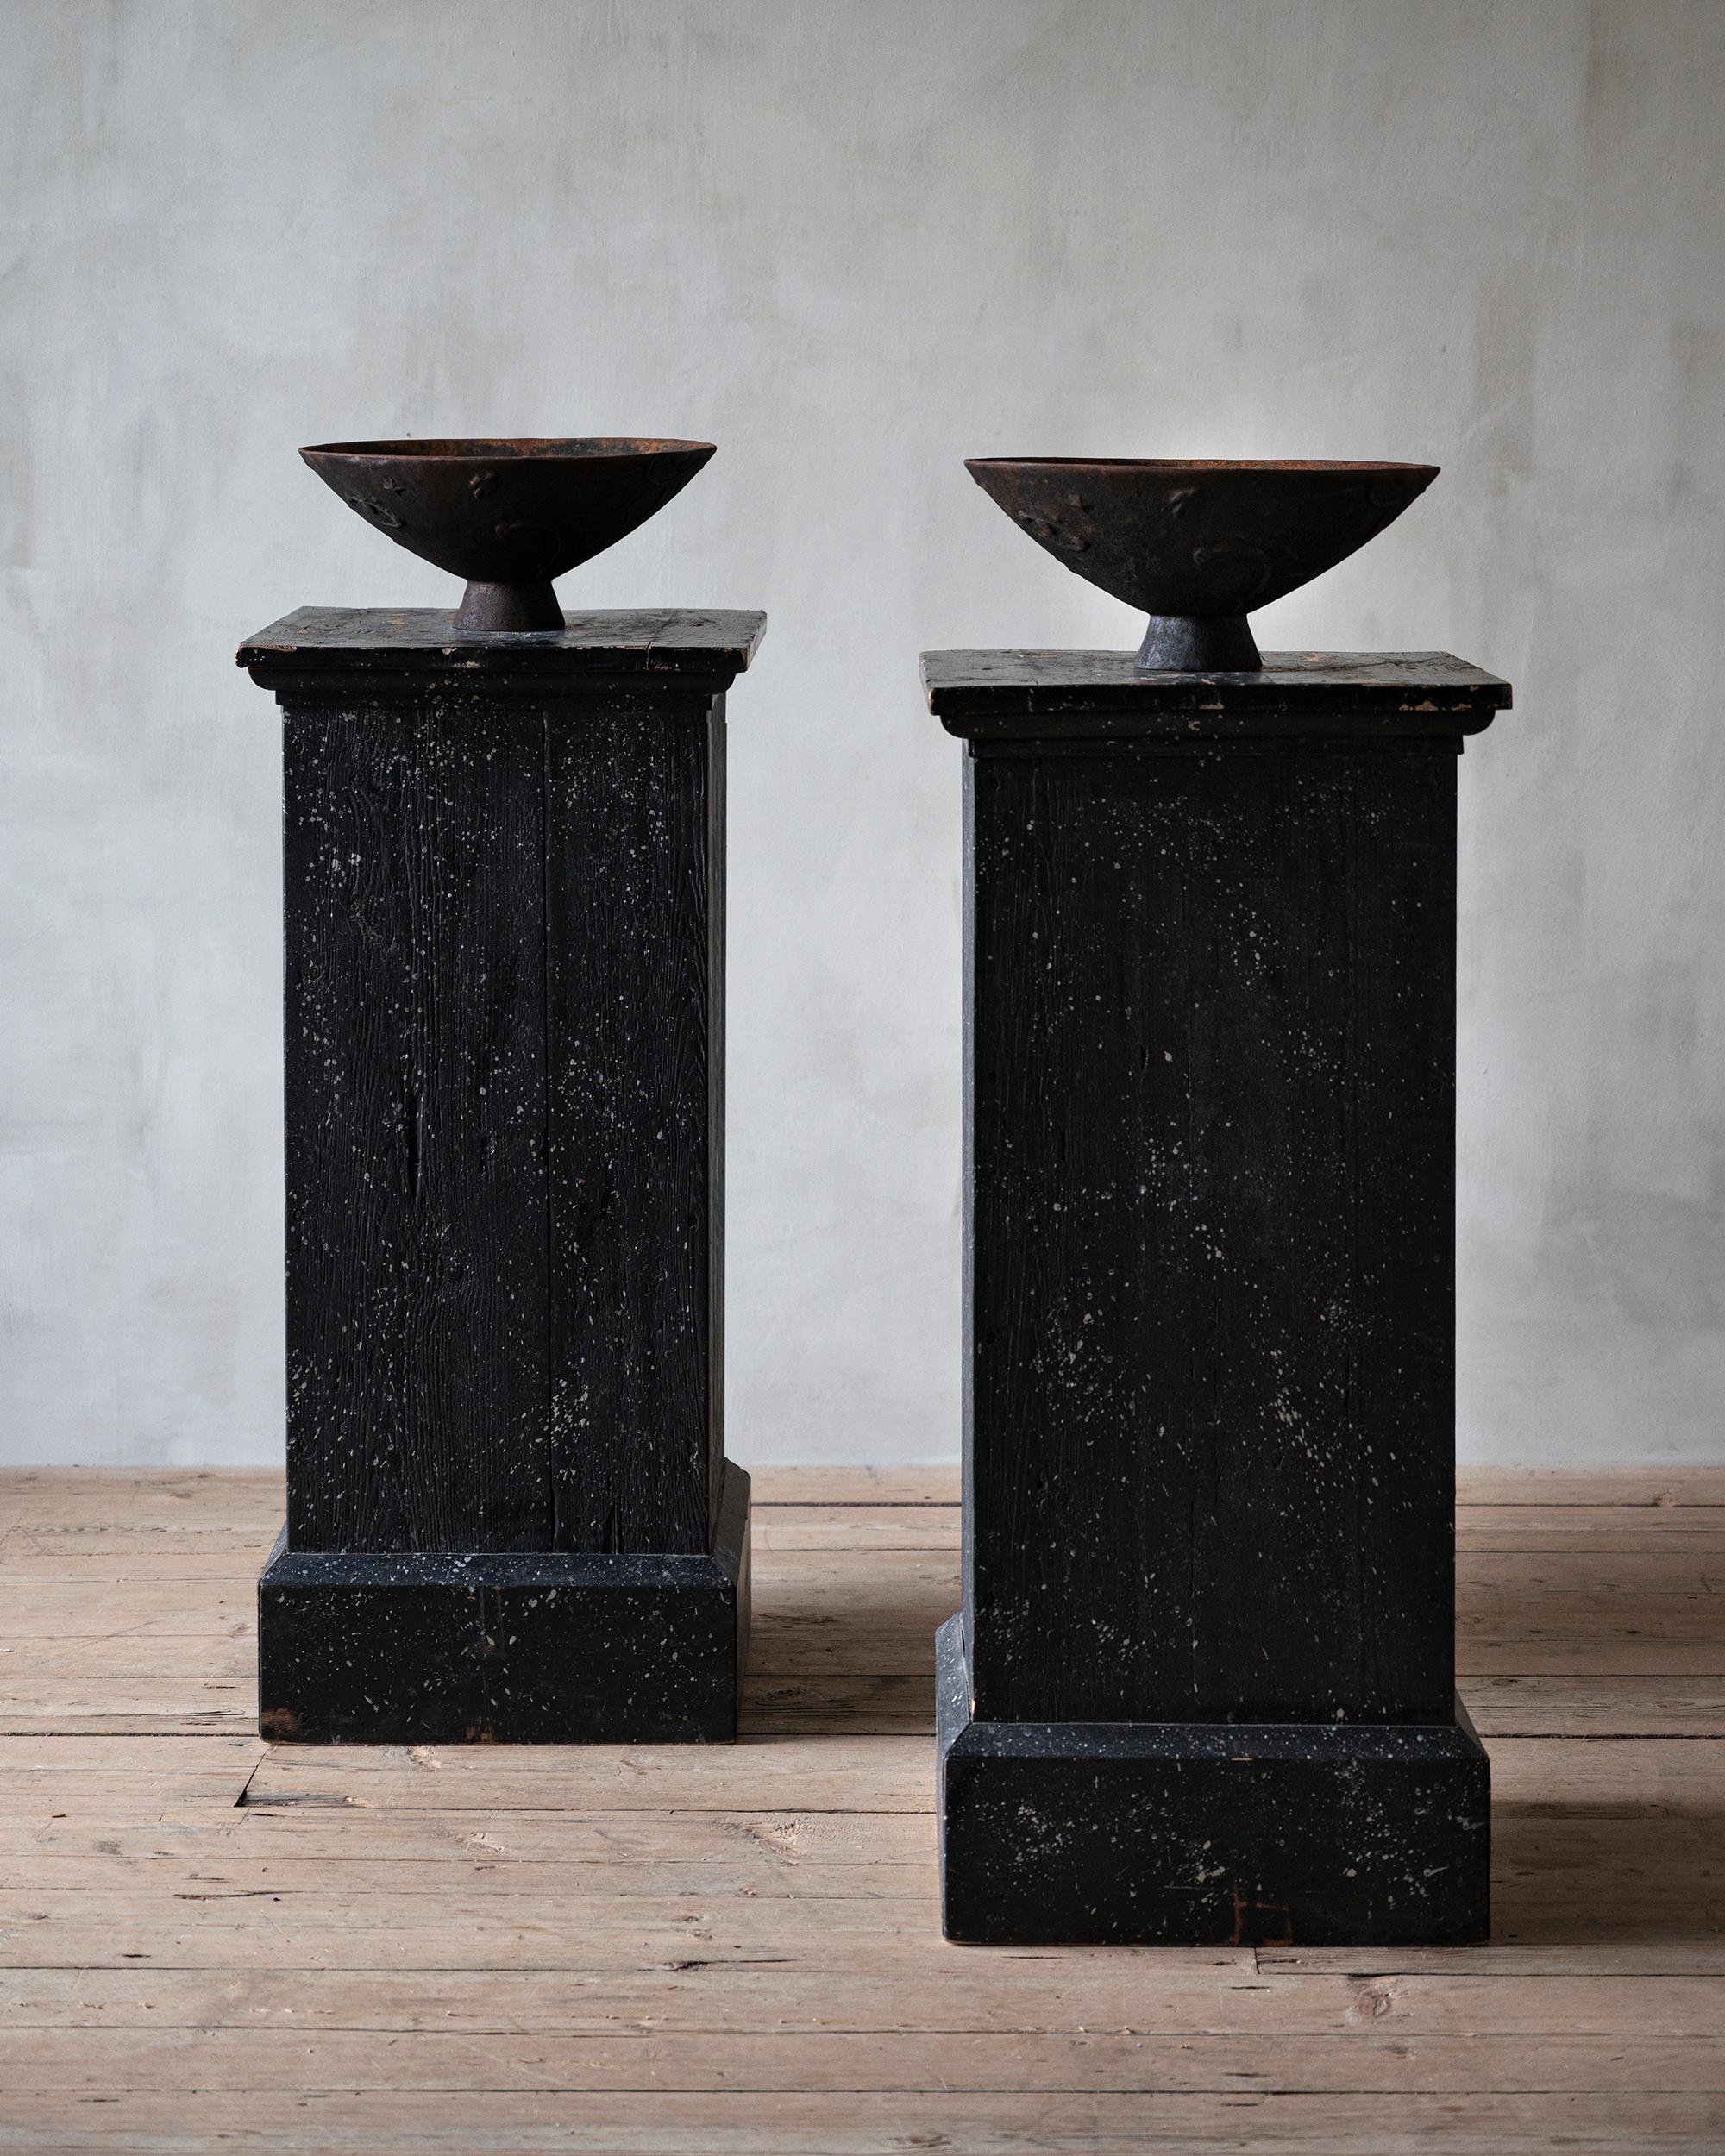 Fine pair of late 19th century Empire style wooden pedestals in an faux marble finish. ca 1890 Sweden.